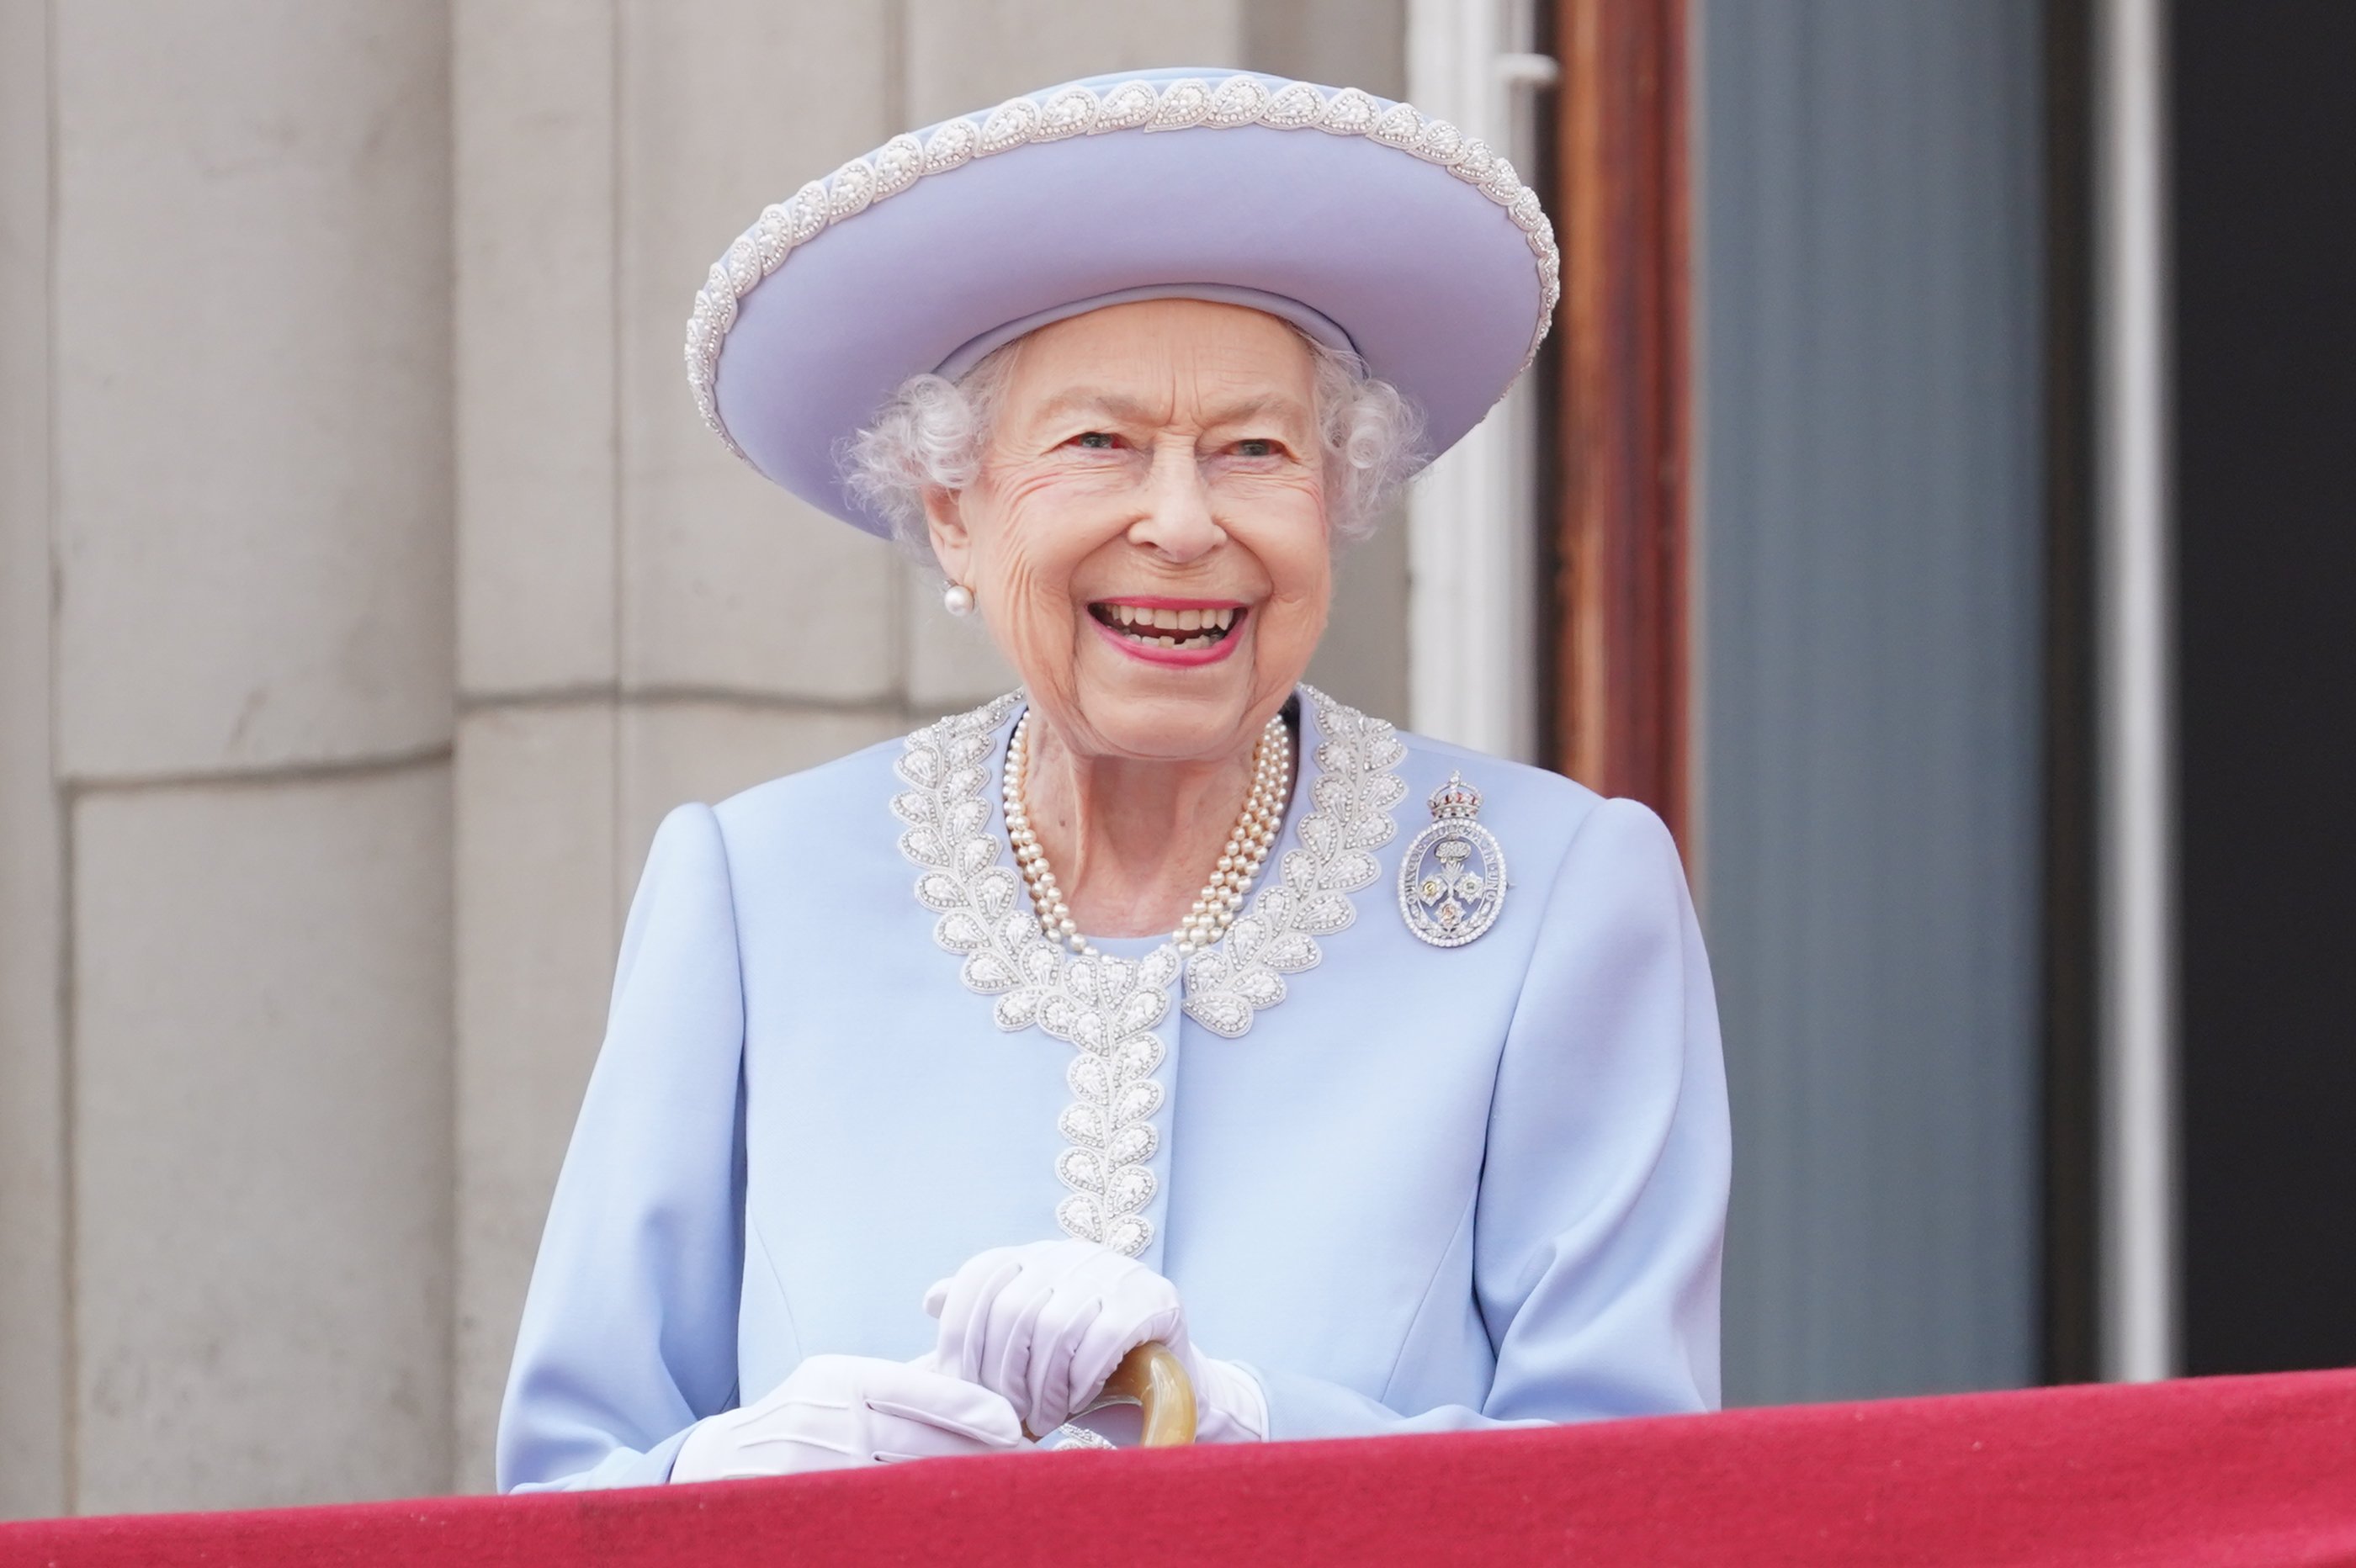 Queen Elizabeth II on the balcony of Buckingham Palace during the Trooping the Colour parade on June 2, 2022, in London, England | Source: Getty Images